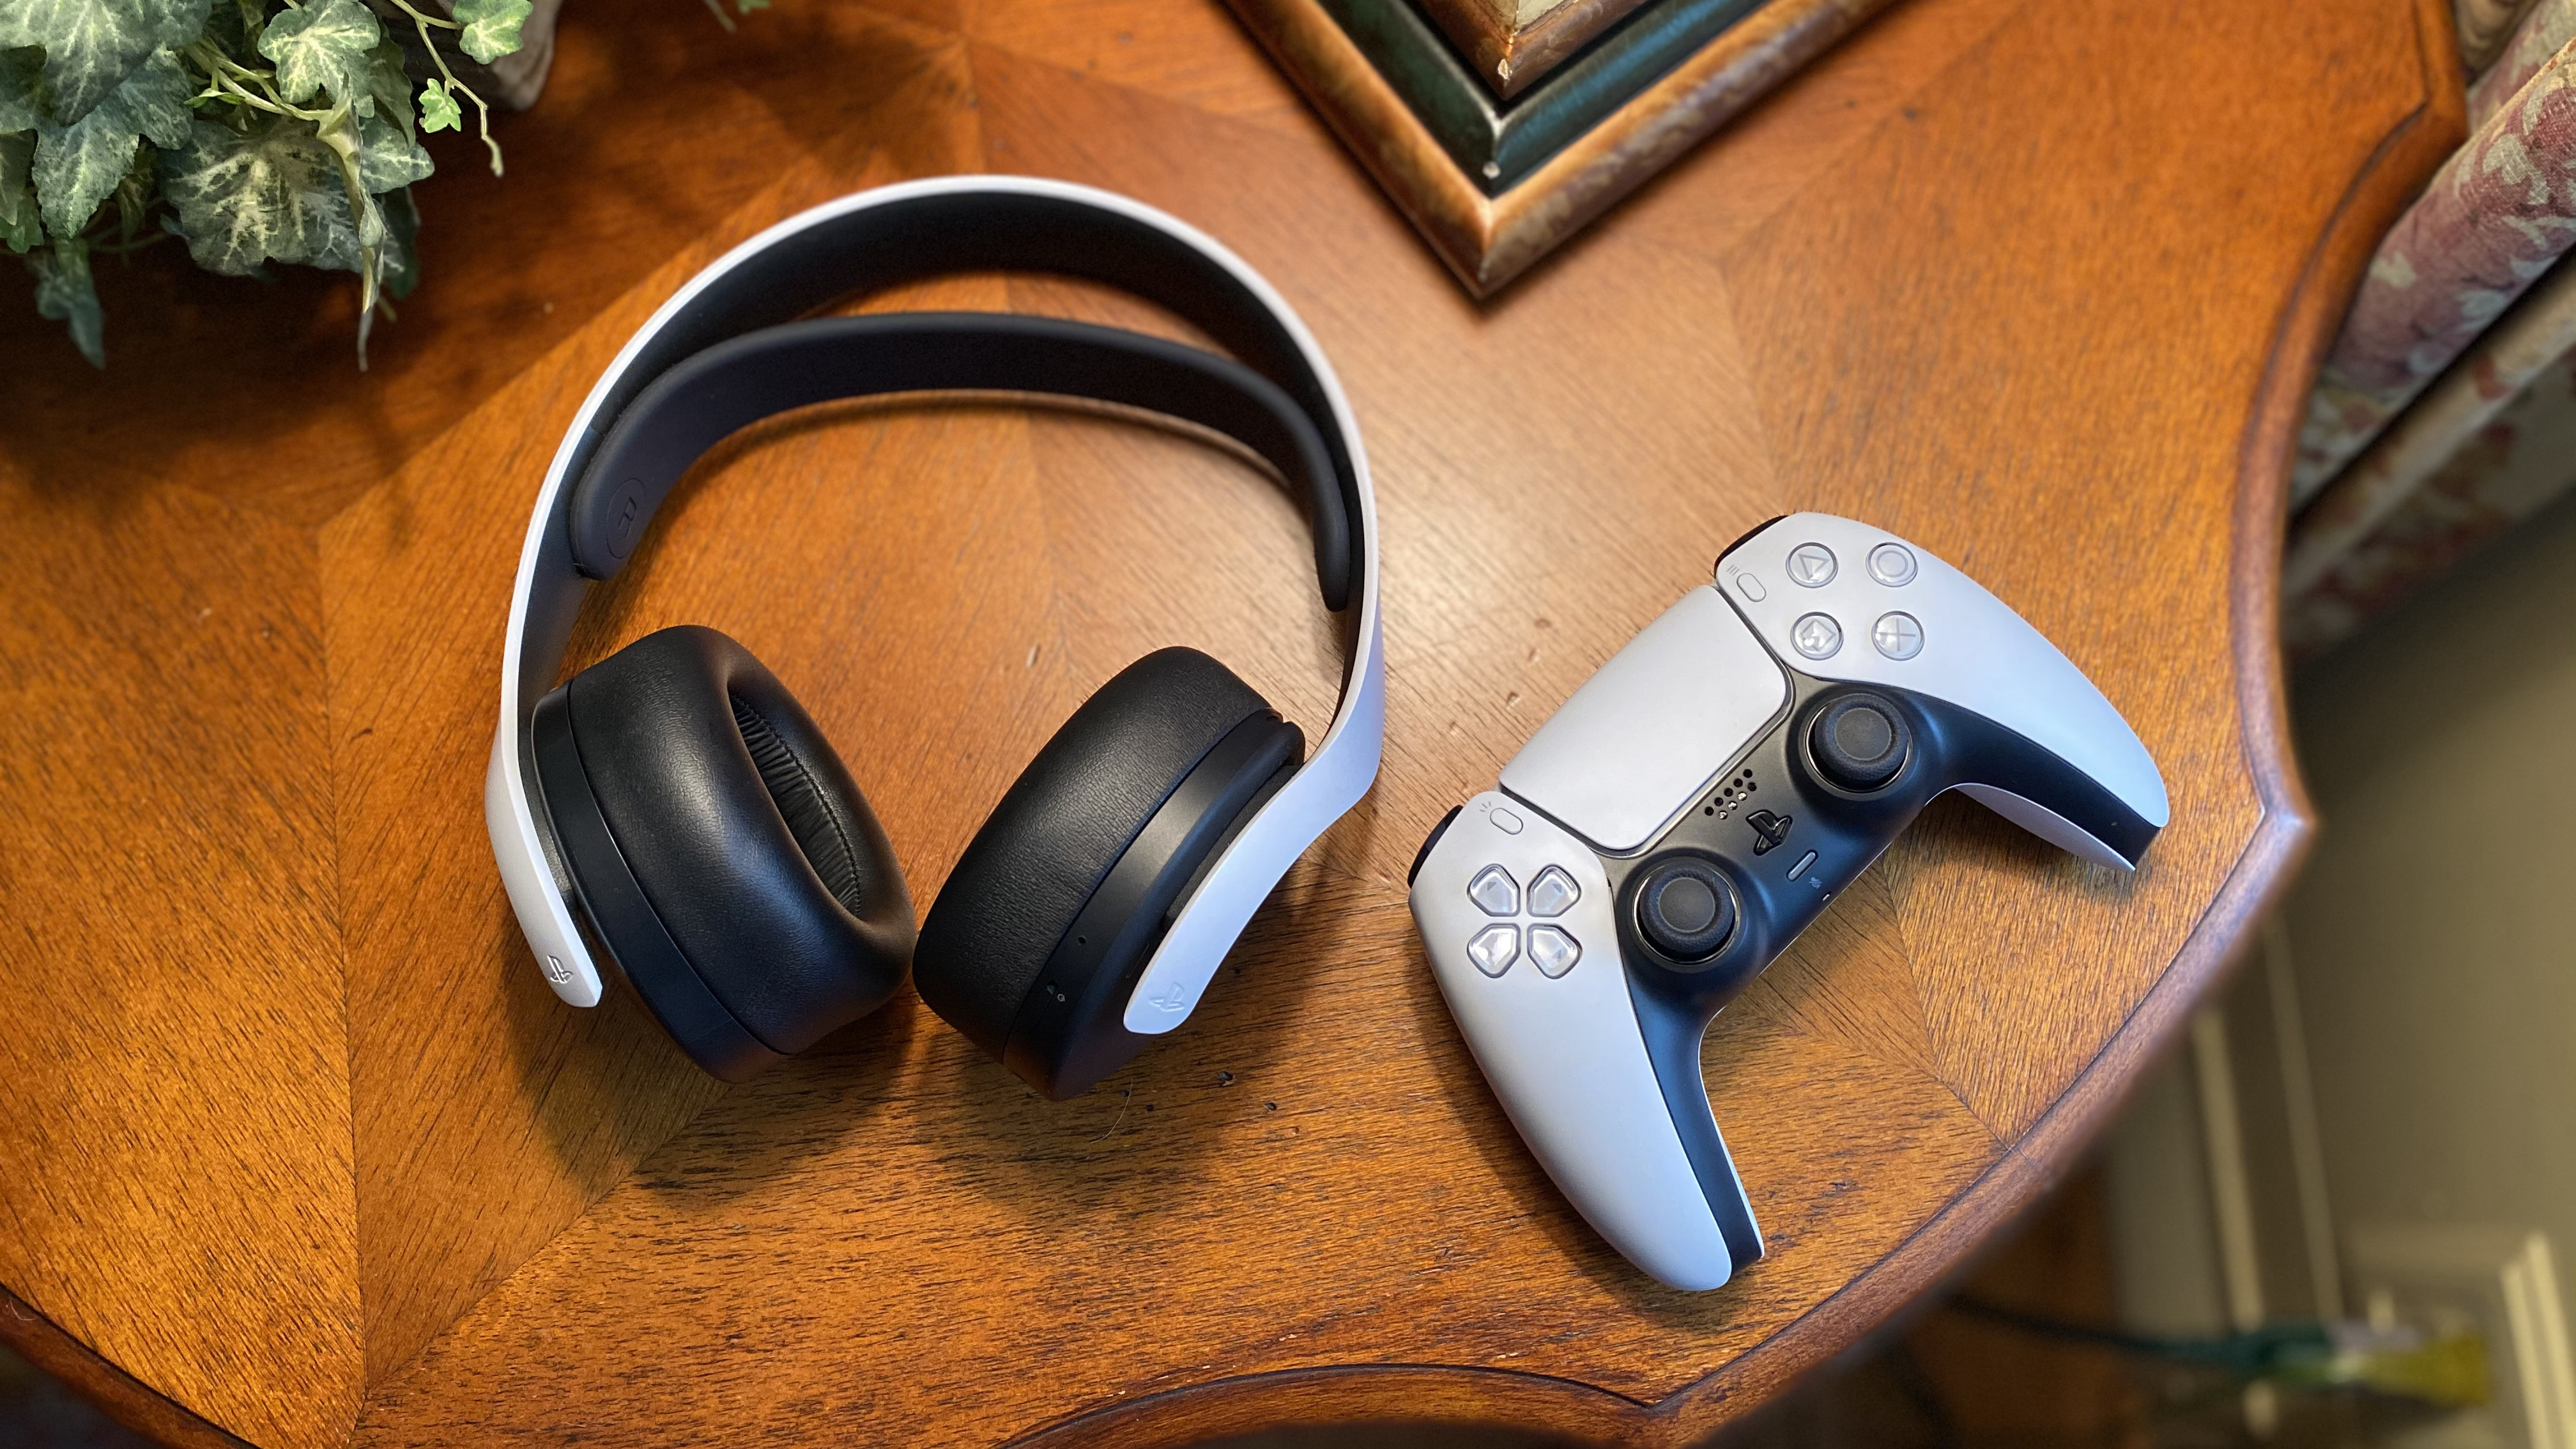 sony playstation headset review